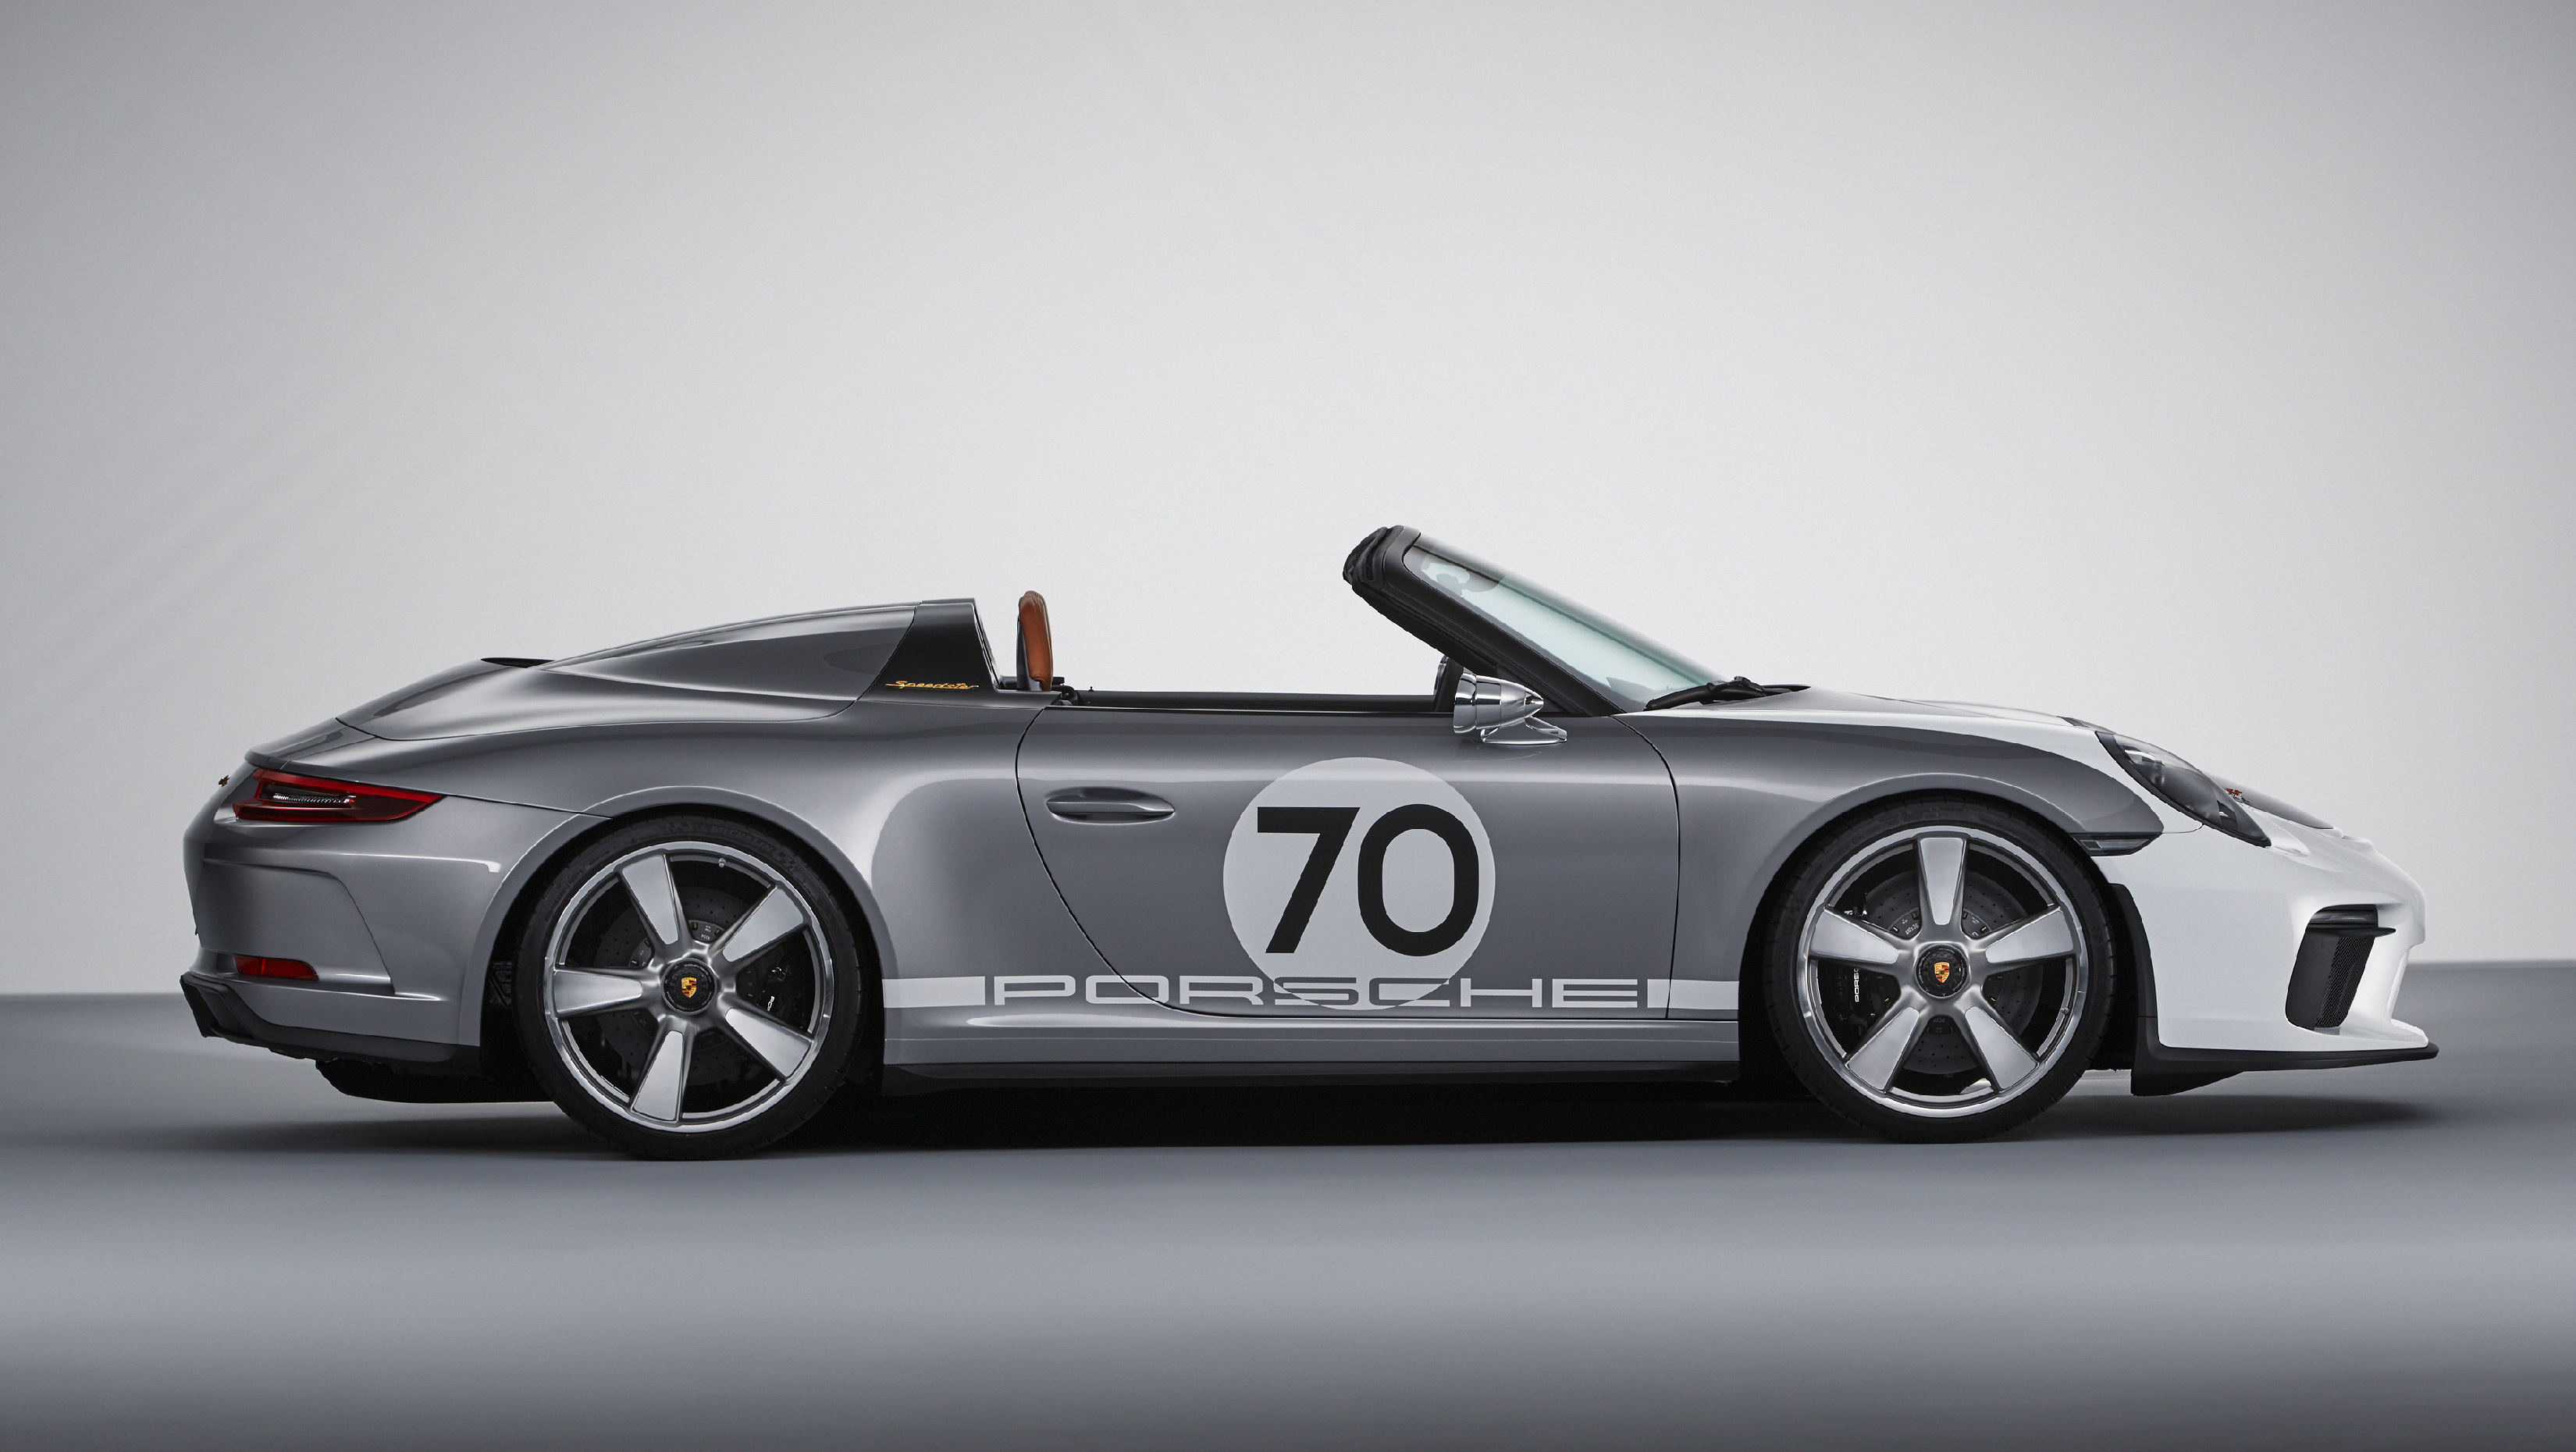 500hp porsche 911 speedster coming in 2019 as limited edition model 3617048 concept 2018 ag